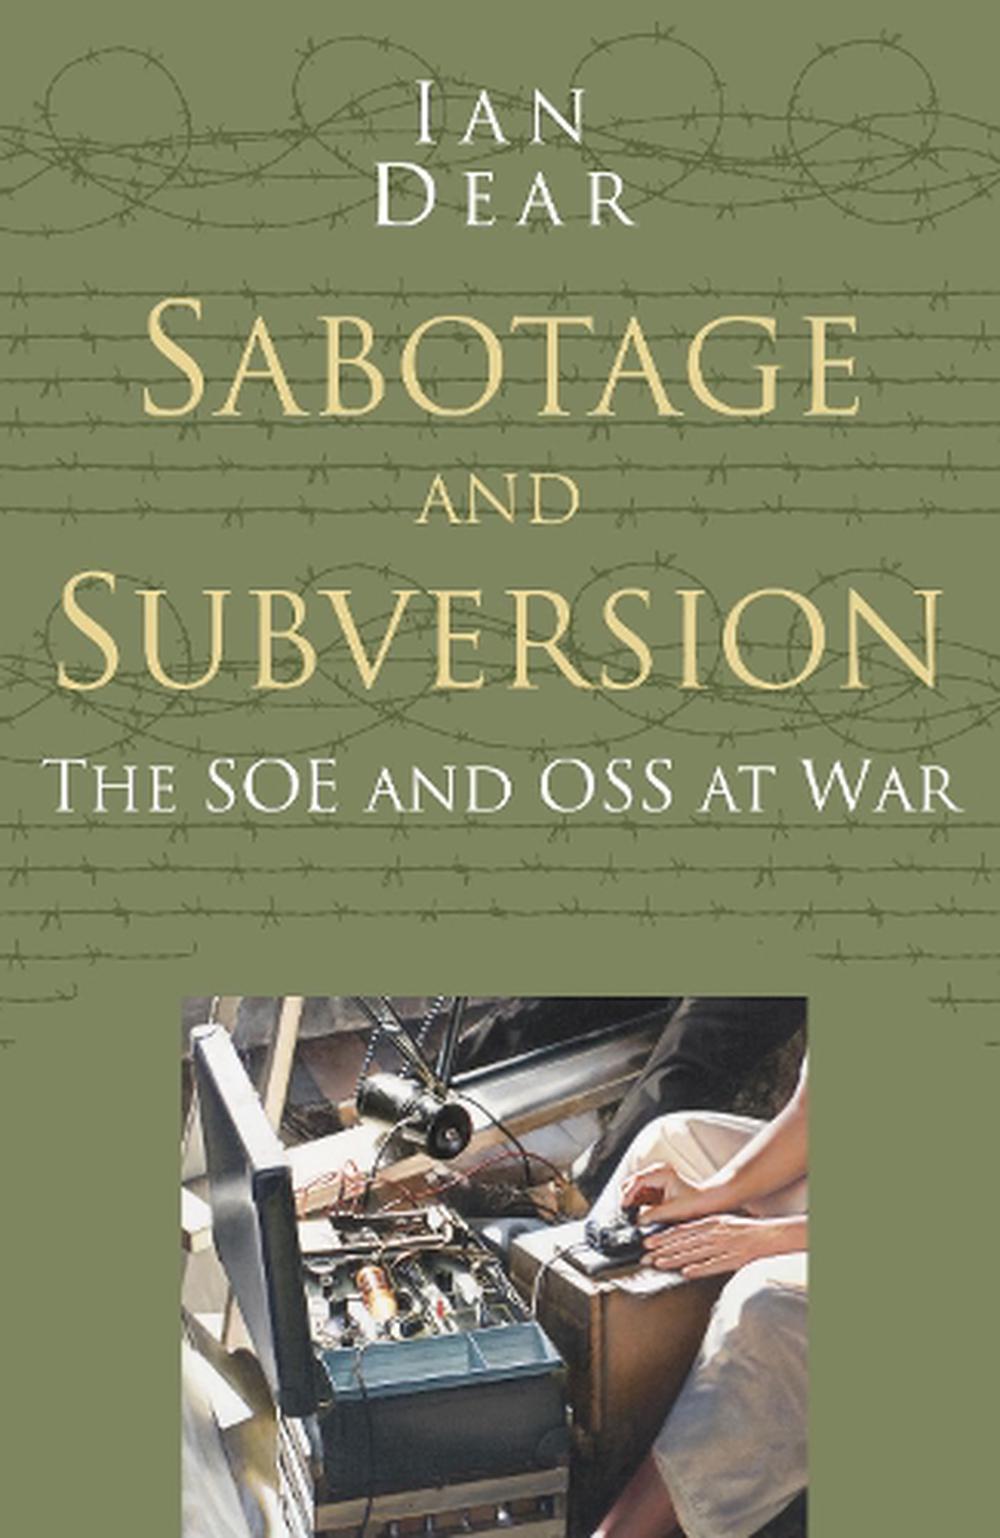 Sabotage and Subversion Classic Histories Series The SOE and OSS at War by Ian 9780750978538